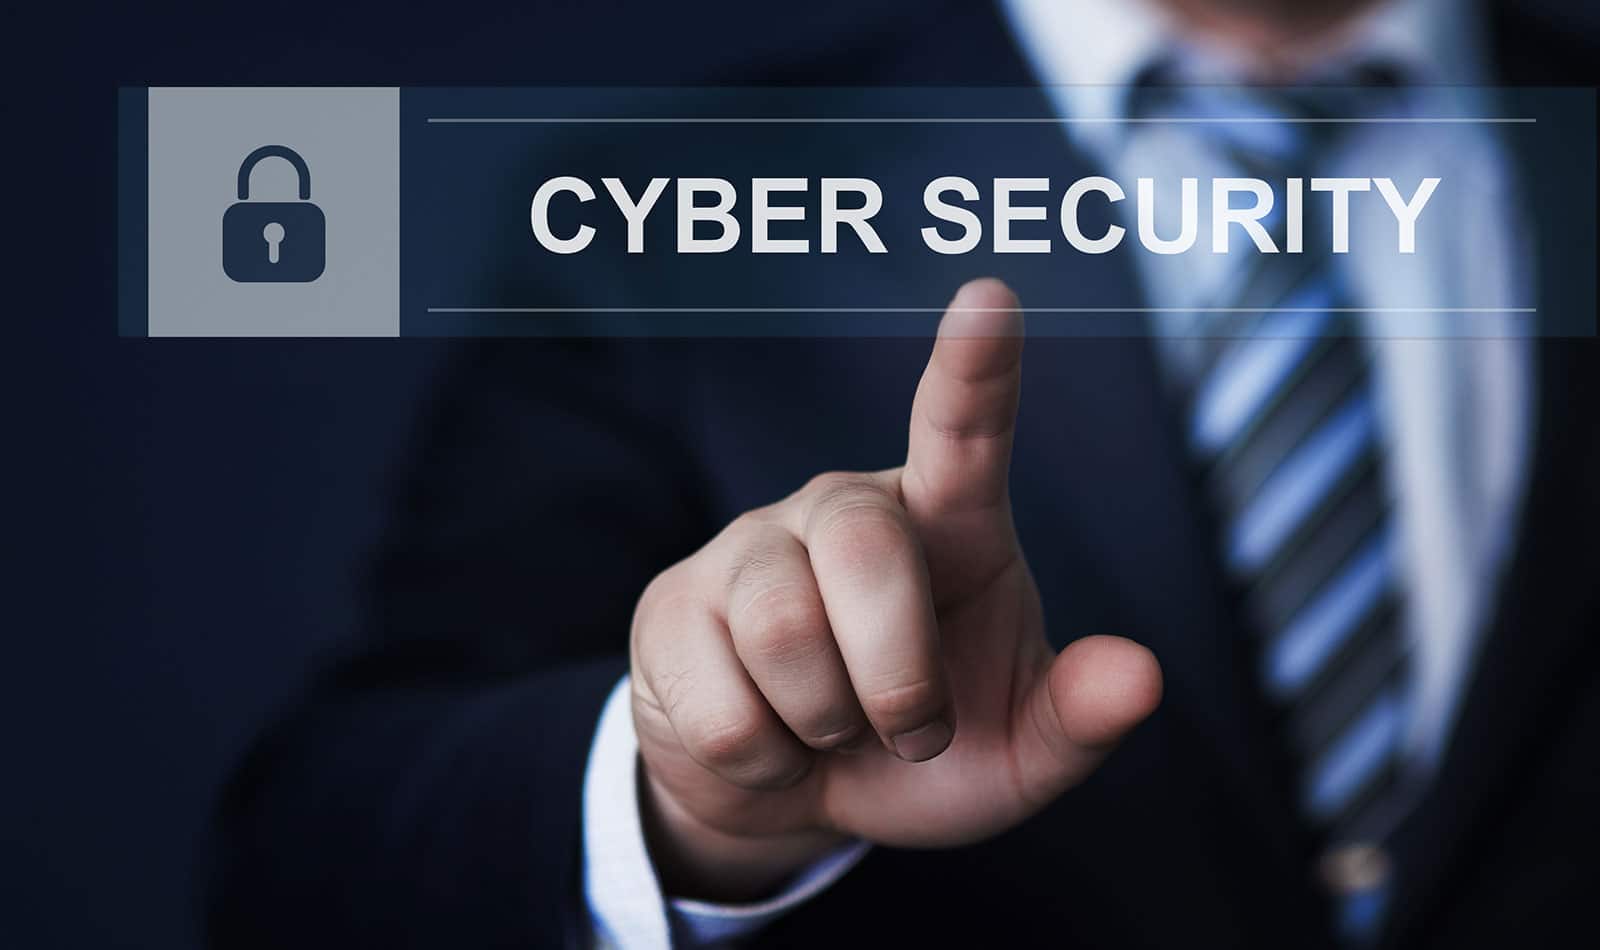 Cyber security e-learning course for shipping